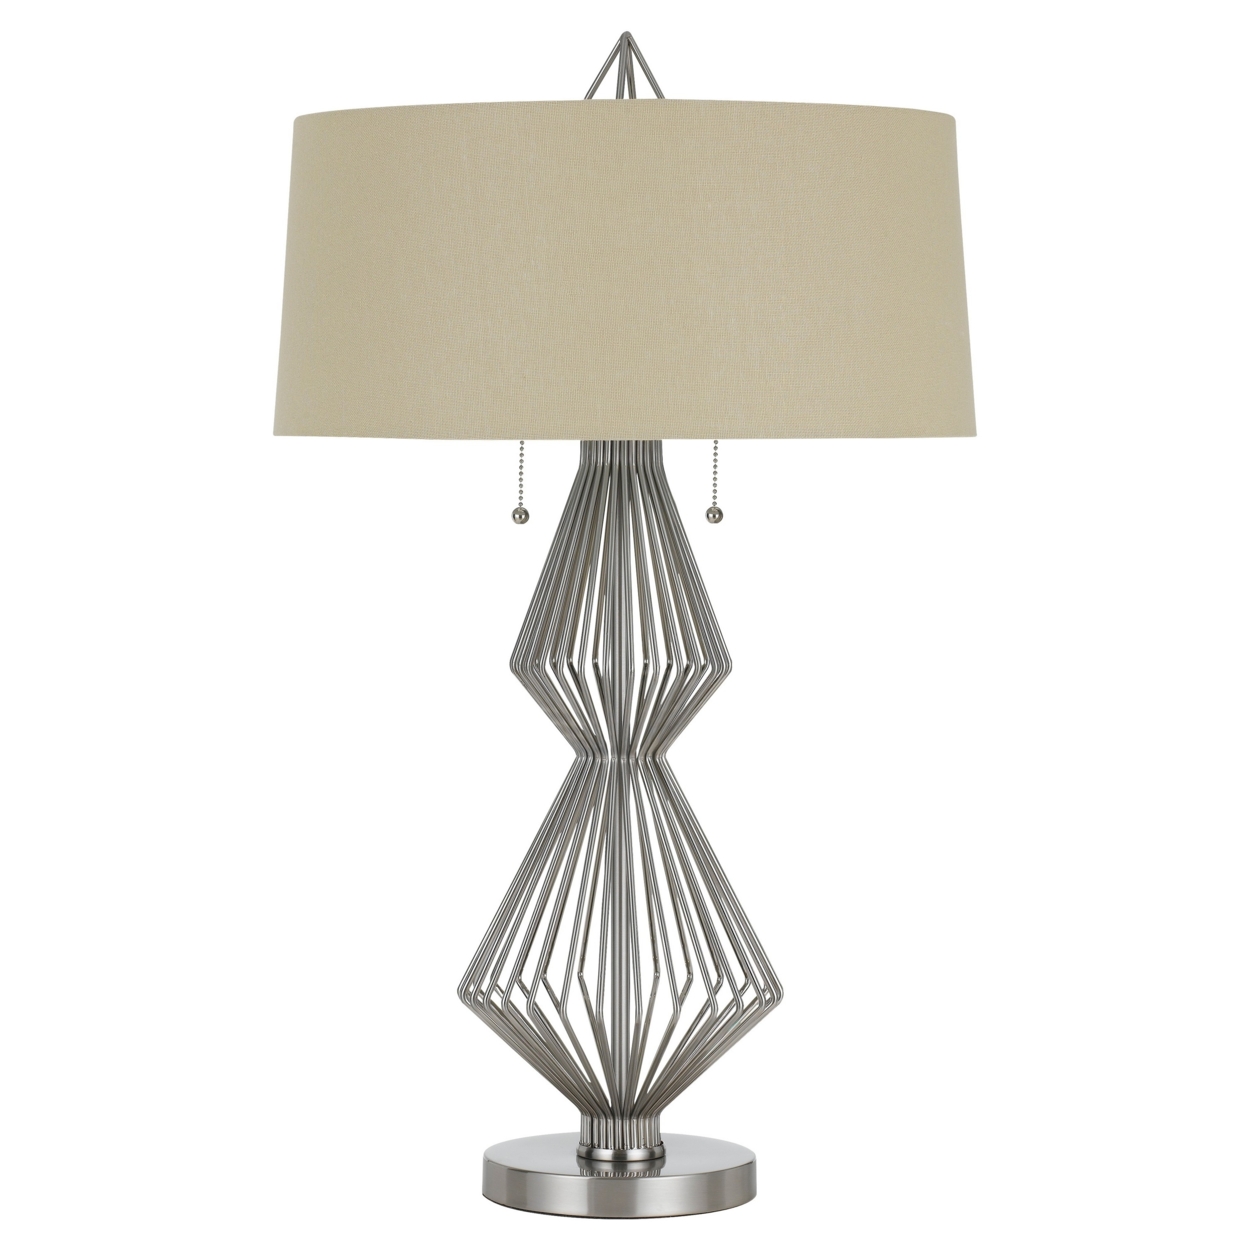 Geometric Body Metal Table Lamp With Fabric Drum Shade, Silver And Beige- Saltoro Sherpi